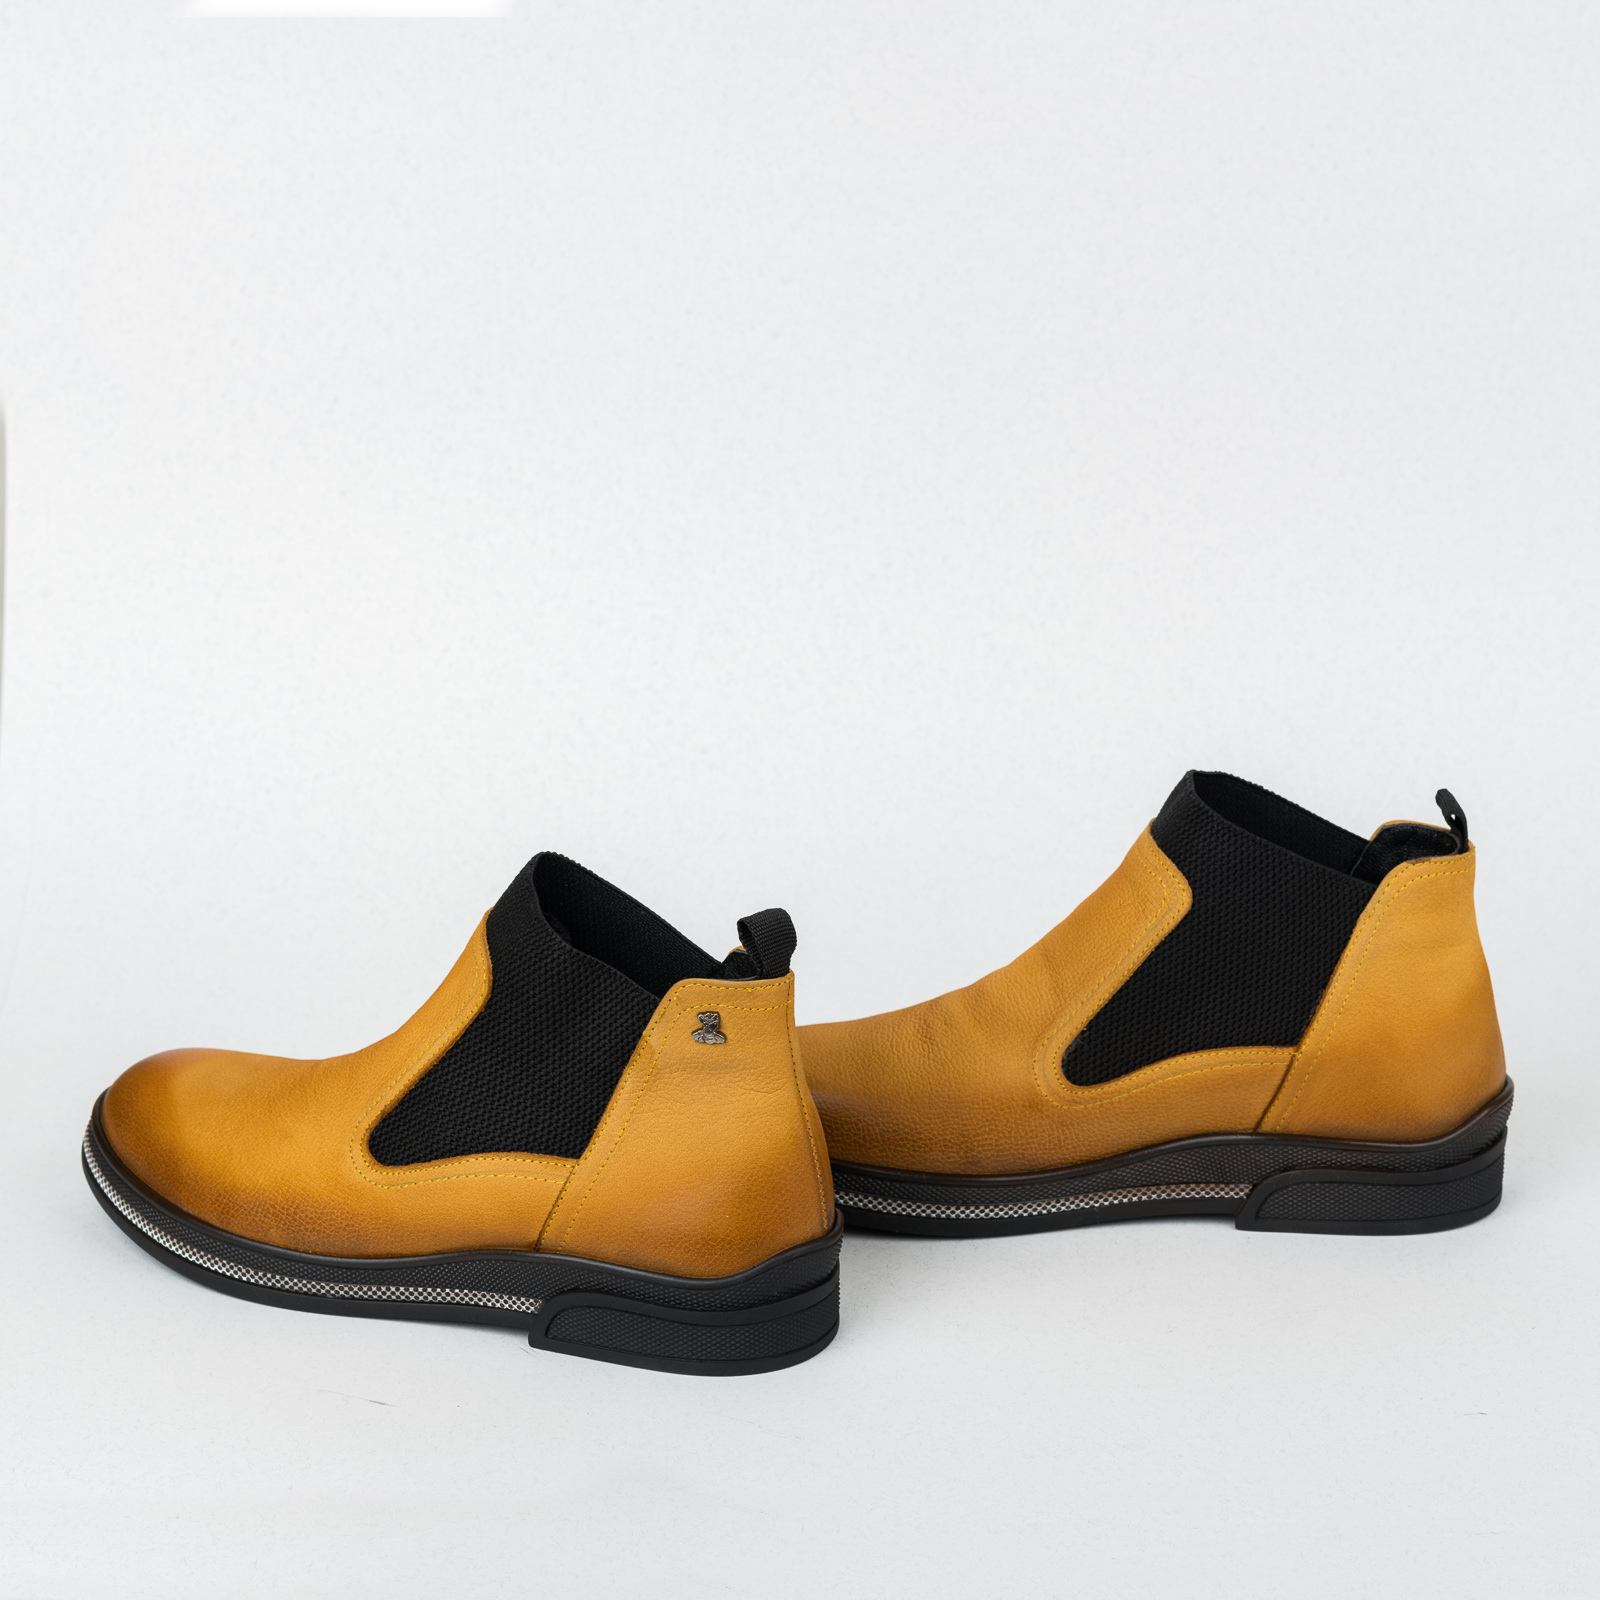 Leather ankle boots B211 - OCHRE